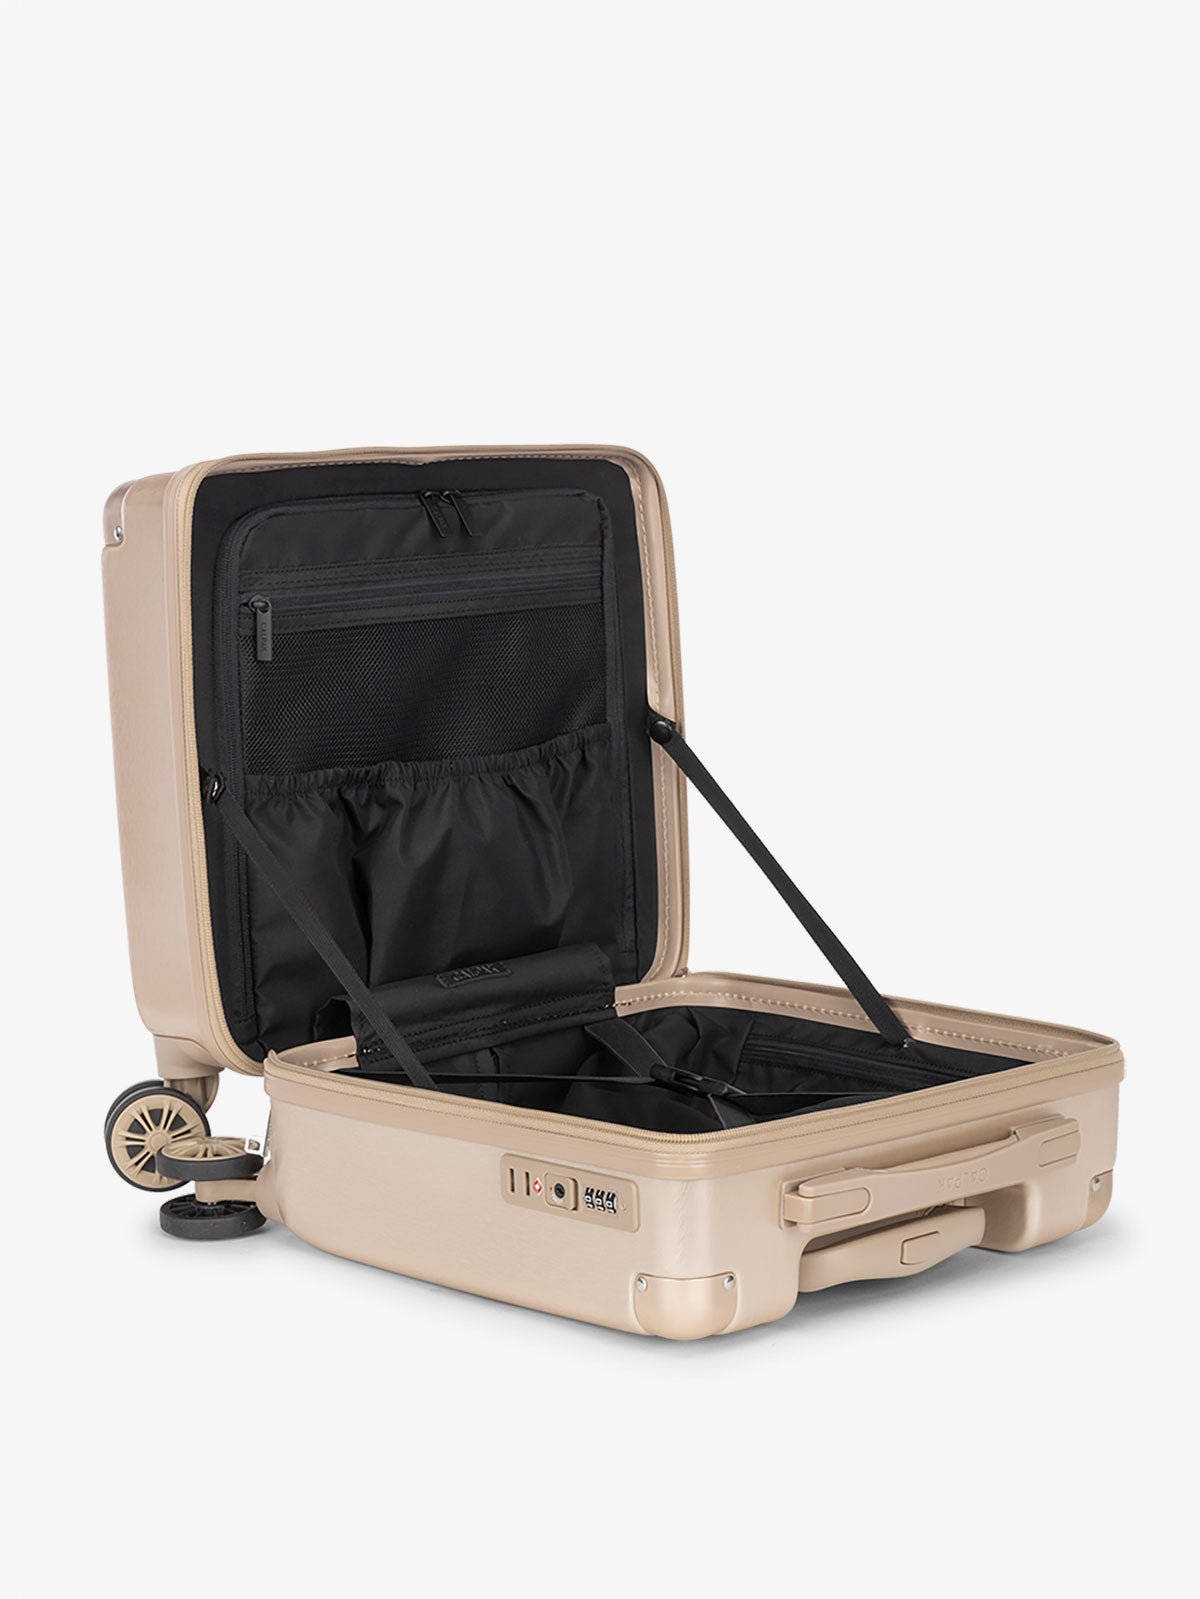 CALPAK Ambuer small carry on with divider and multiple interior pockets in gold